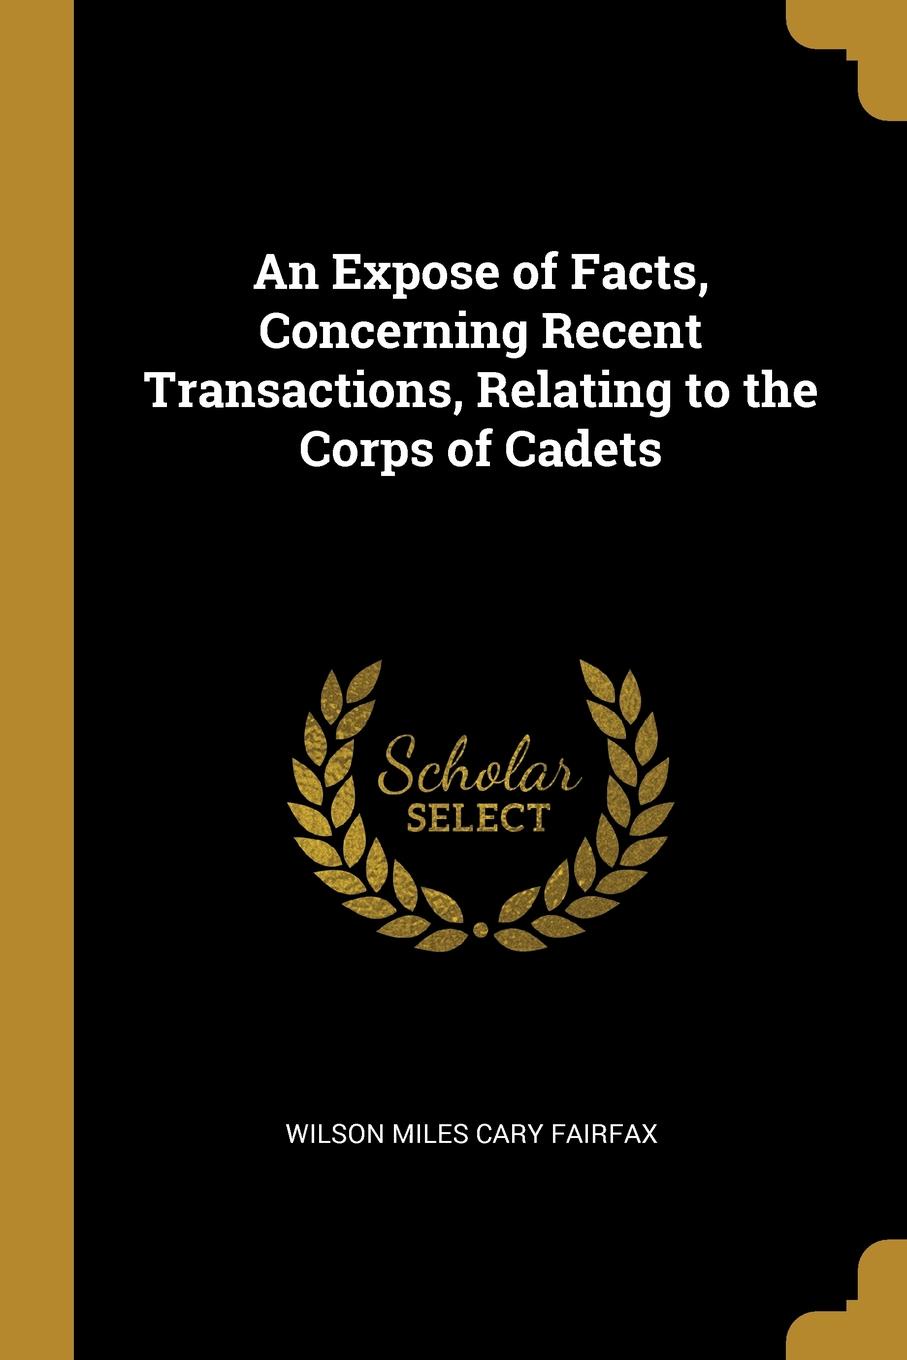 An Expose of Facts, Concerning Recent Transactions, Relating to the Corps of Cadets